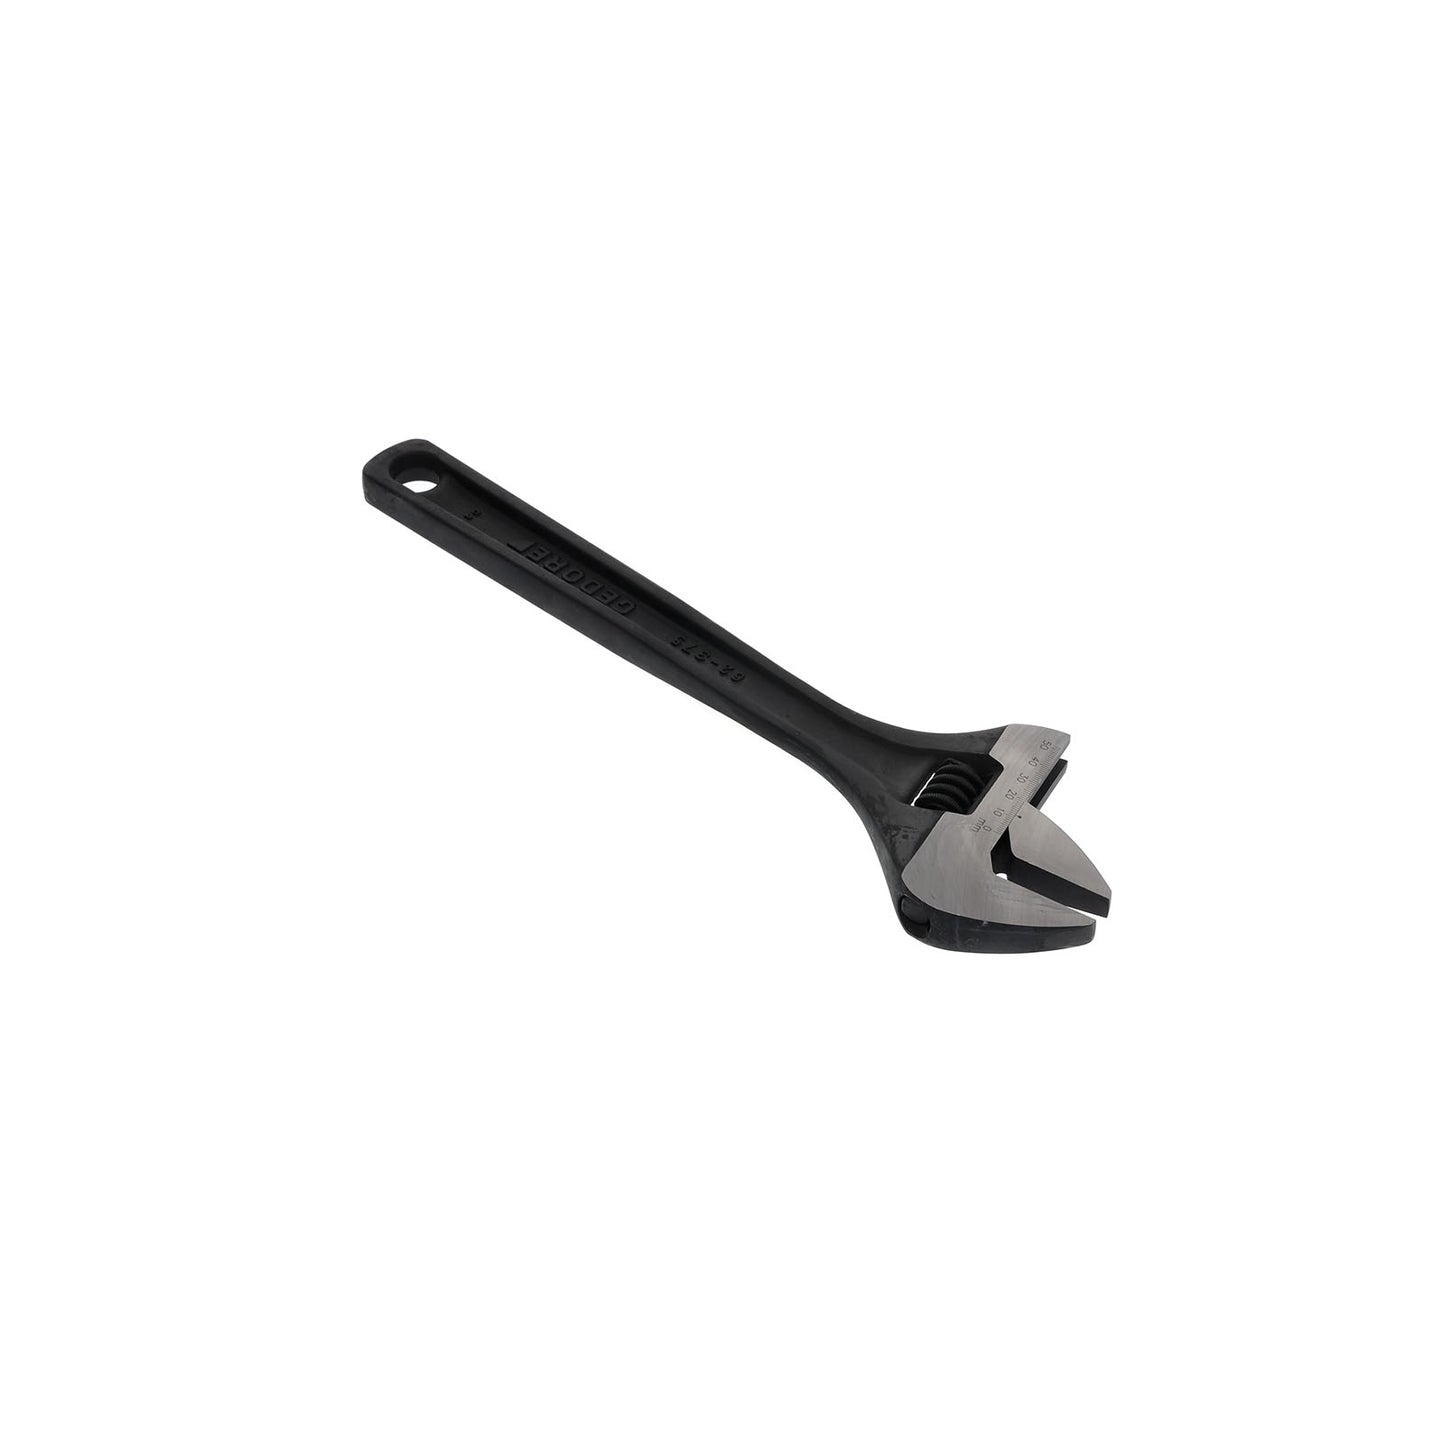 GEDORE 62 P 15 - Phosphated Adjustable Wrench, 15" (6368430)